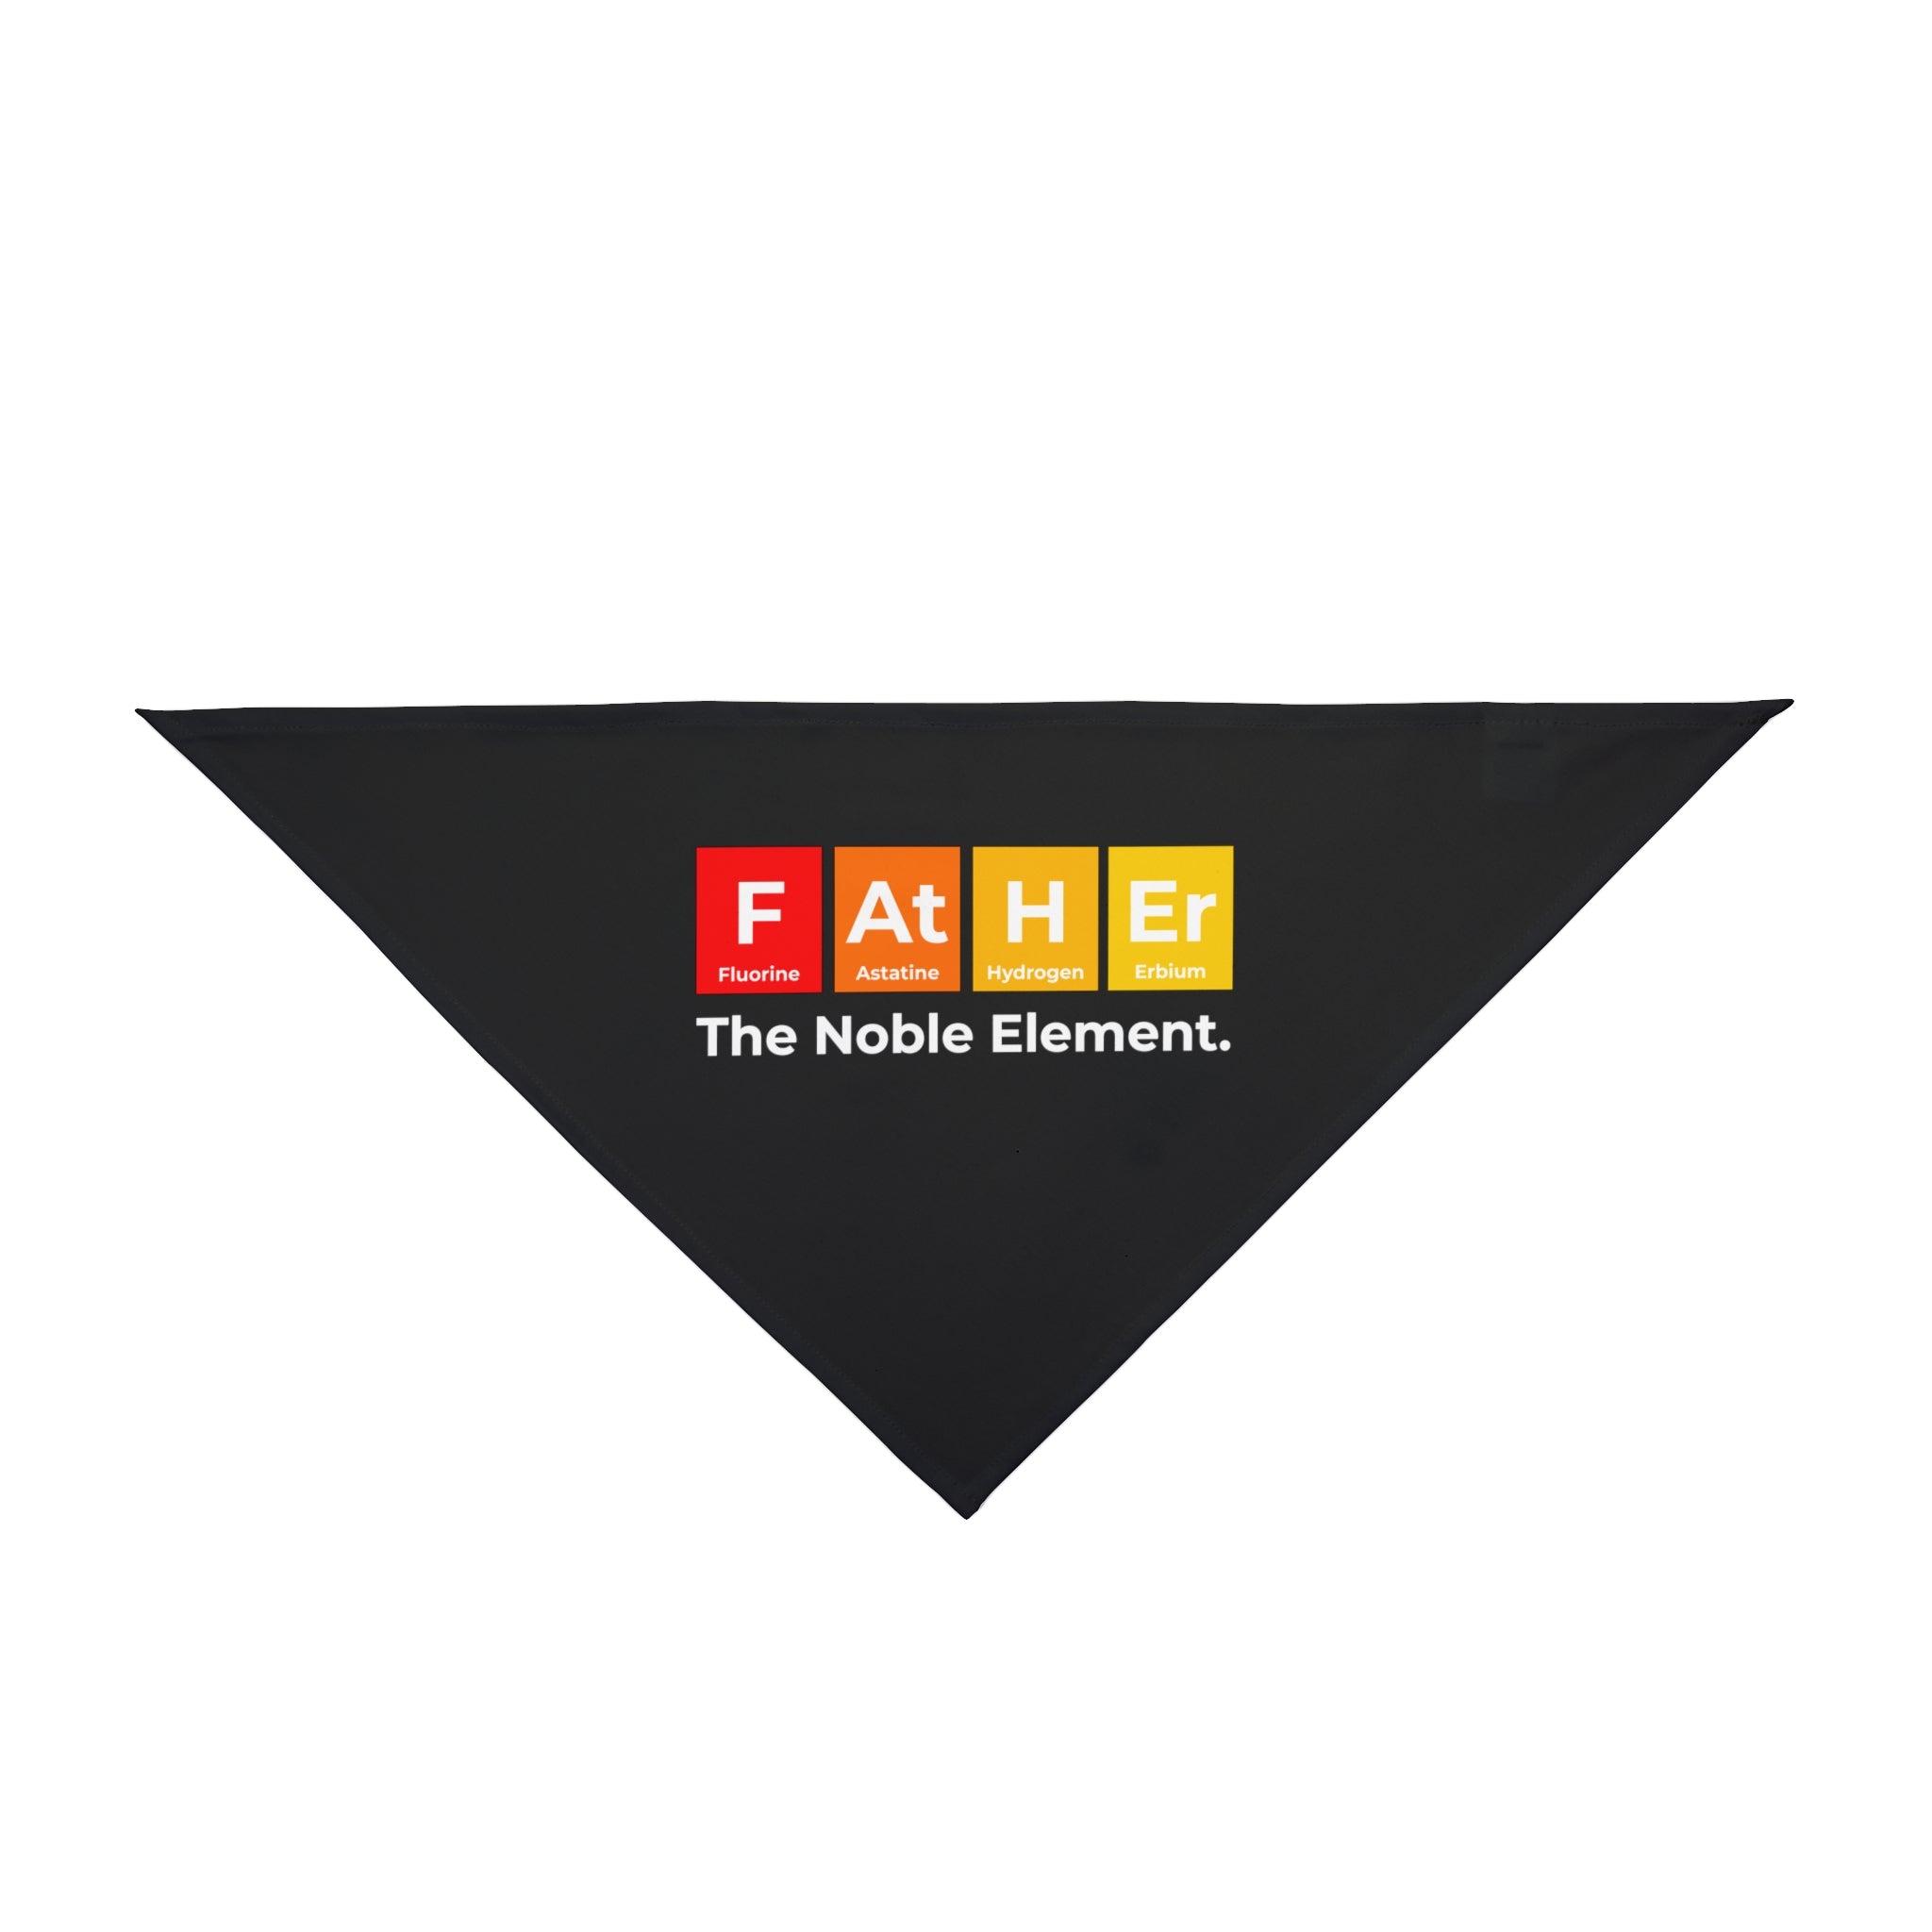 A black triangular bandana with text: "Father" represented as elements from the periodic table (Fluorine, Astatine, Hydrogen, Erbium) in red, orange, yellow squares and "The Noble Element" below. This **Father Graphic - Pet Bandana** is perfect for Doggo Dad Honor and incorporates a pet-friendly design.